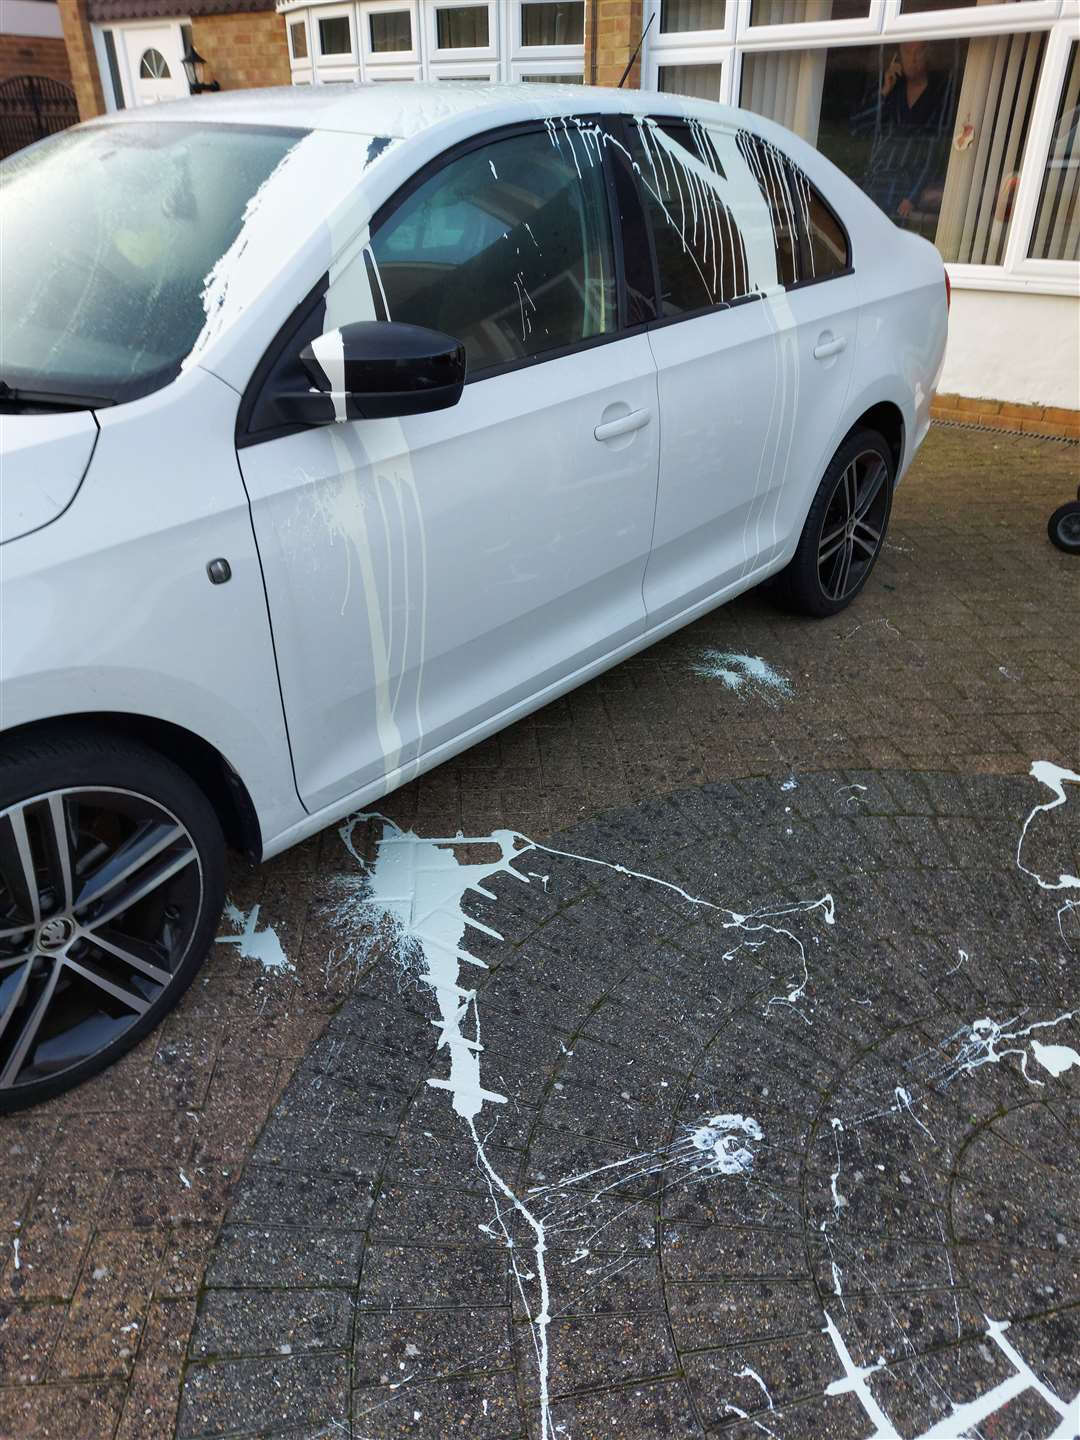 Paint everywhere after the attack